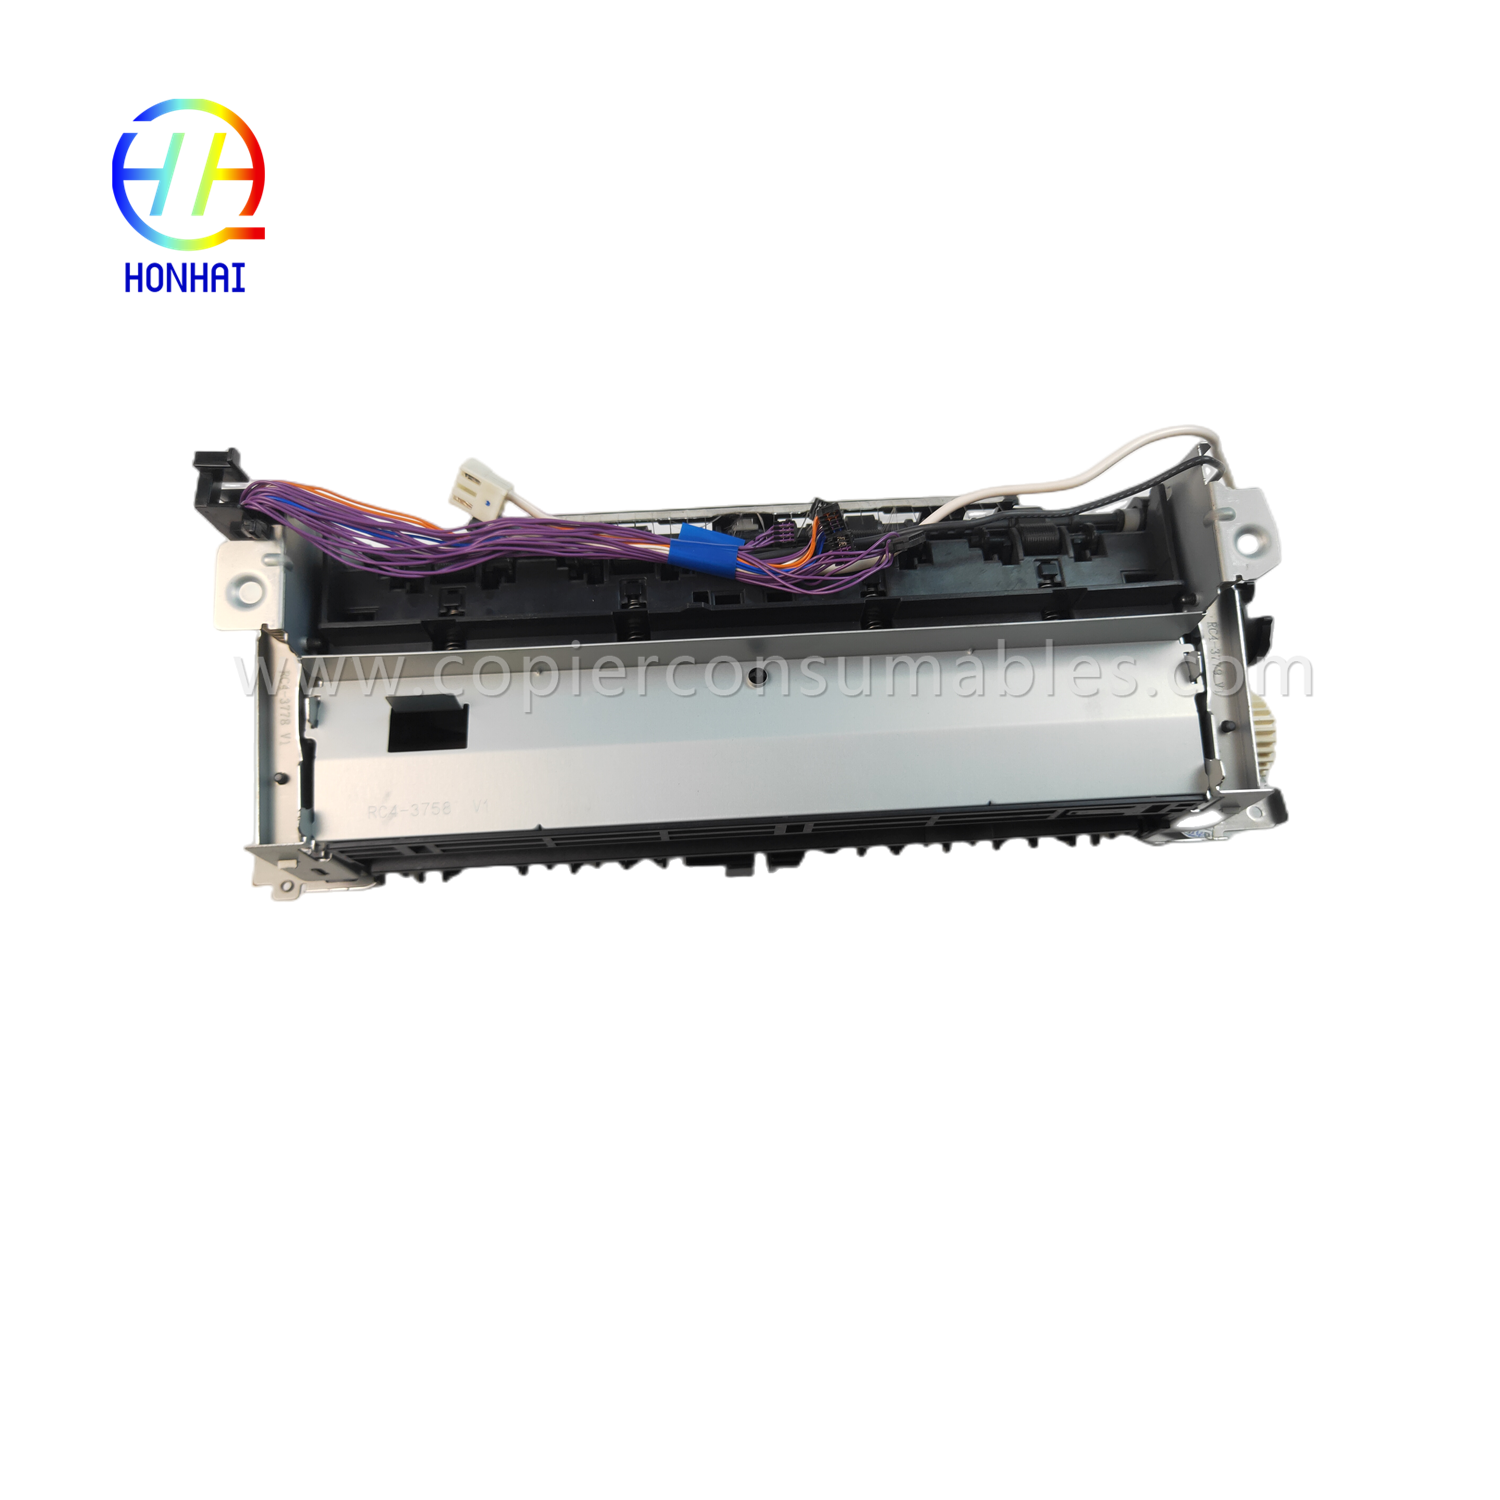 Fuser Unit para sa HP M278 M281CDW M281FDW M253 M254DW M254DN RM2-2503 Fuser Assembly